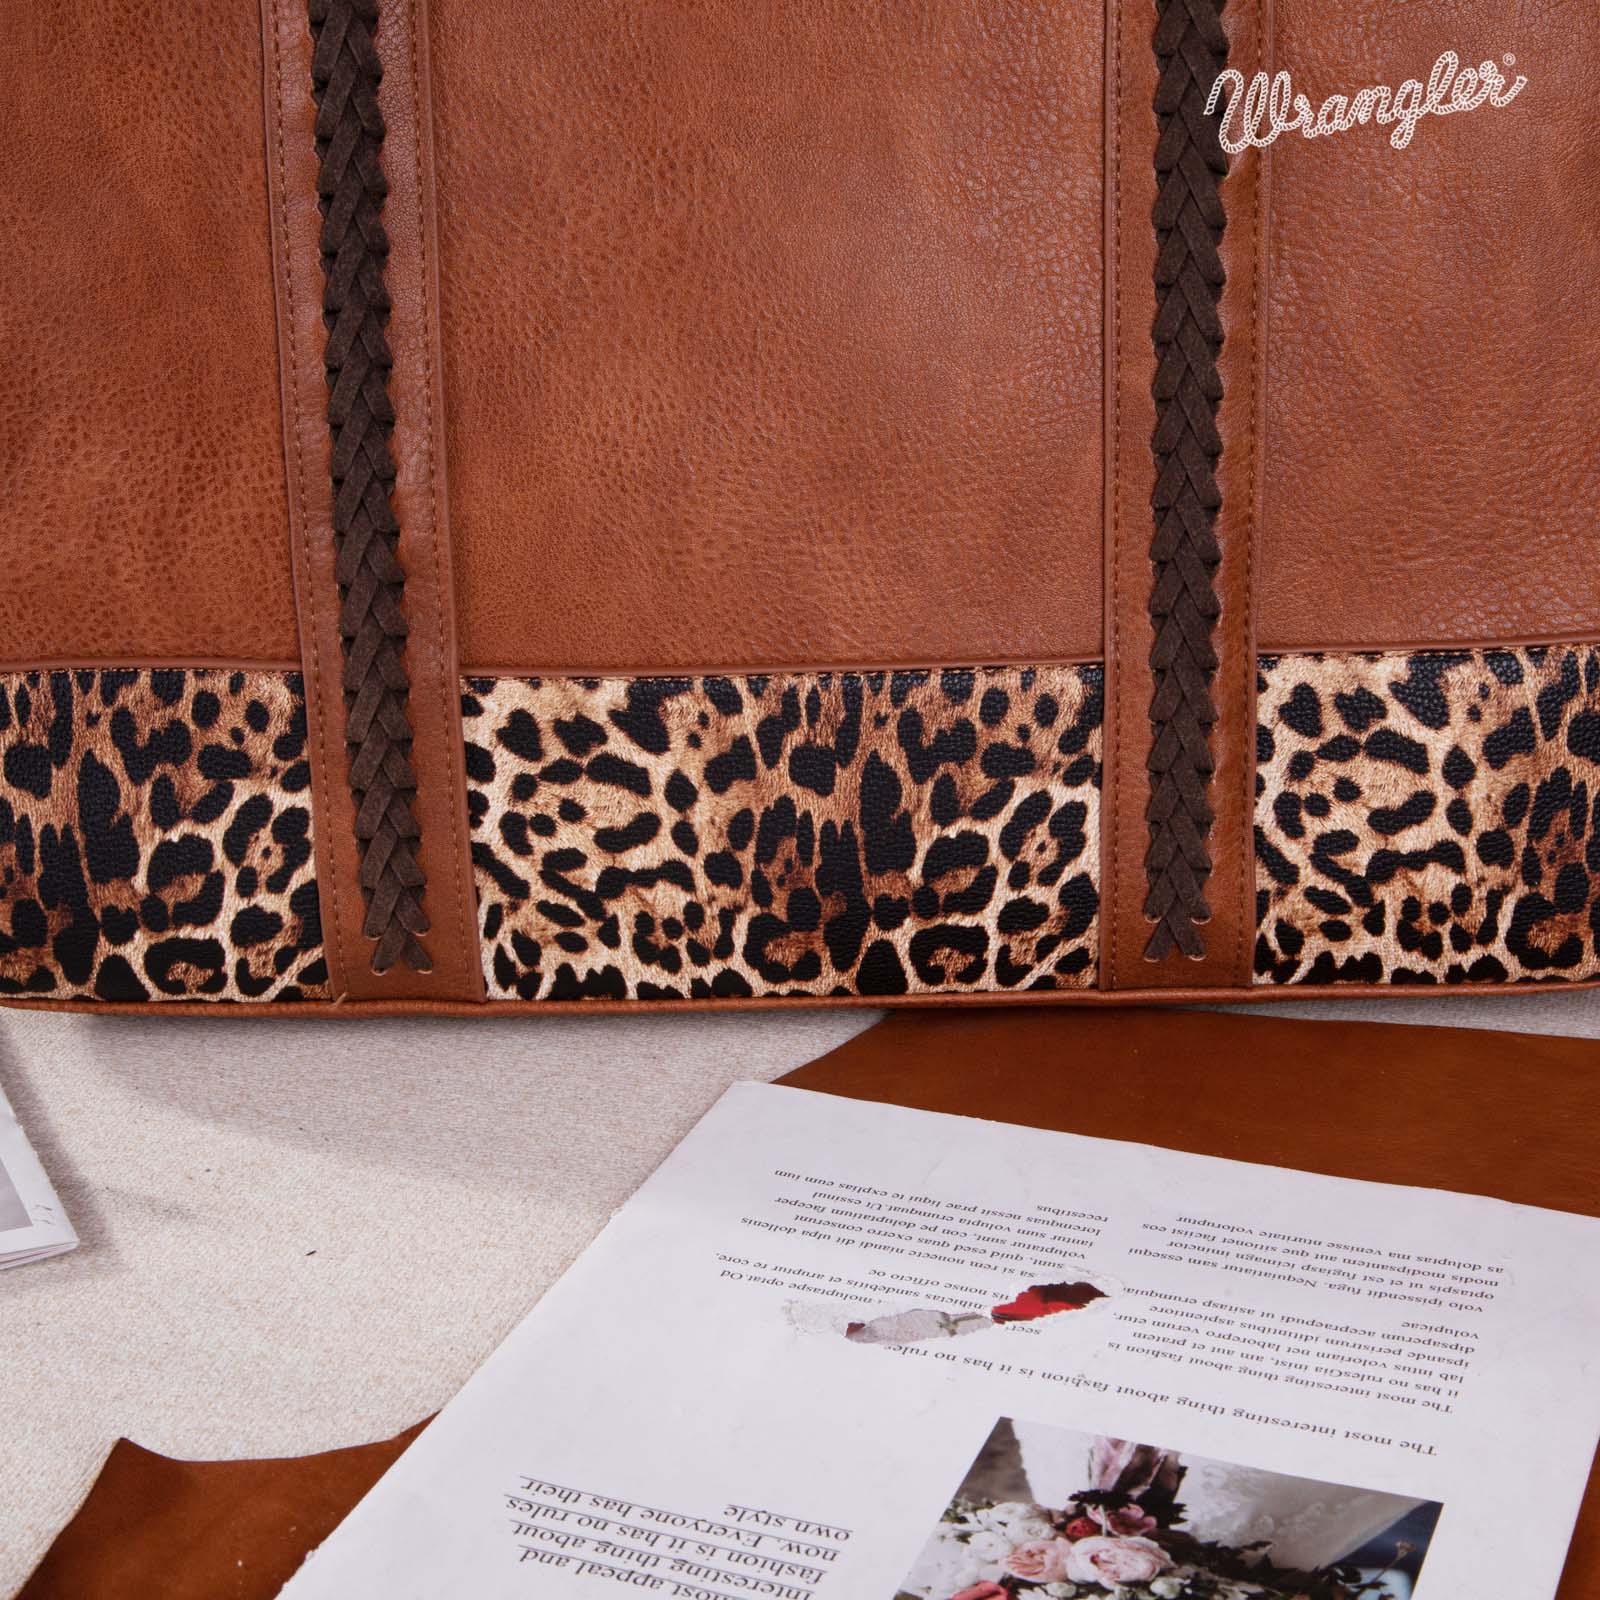 2024 New Wrangler Concealed Carry Leopard/Crocodile/Cow Pattern Tote/Crossbody Bag